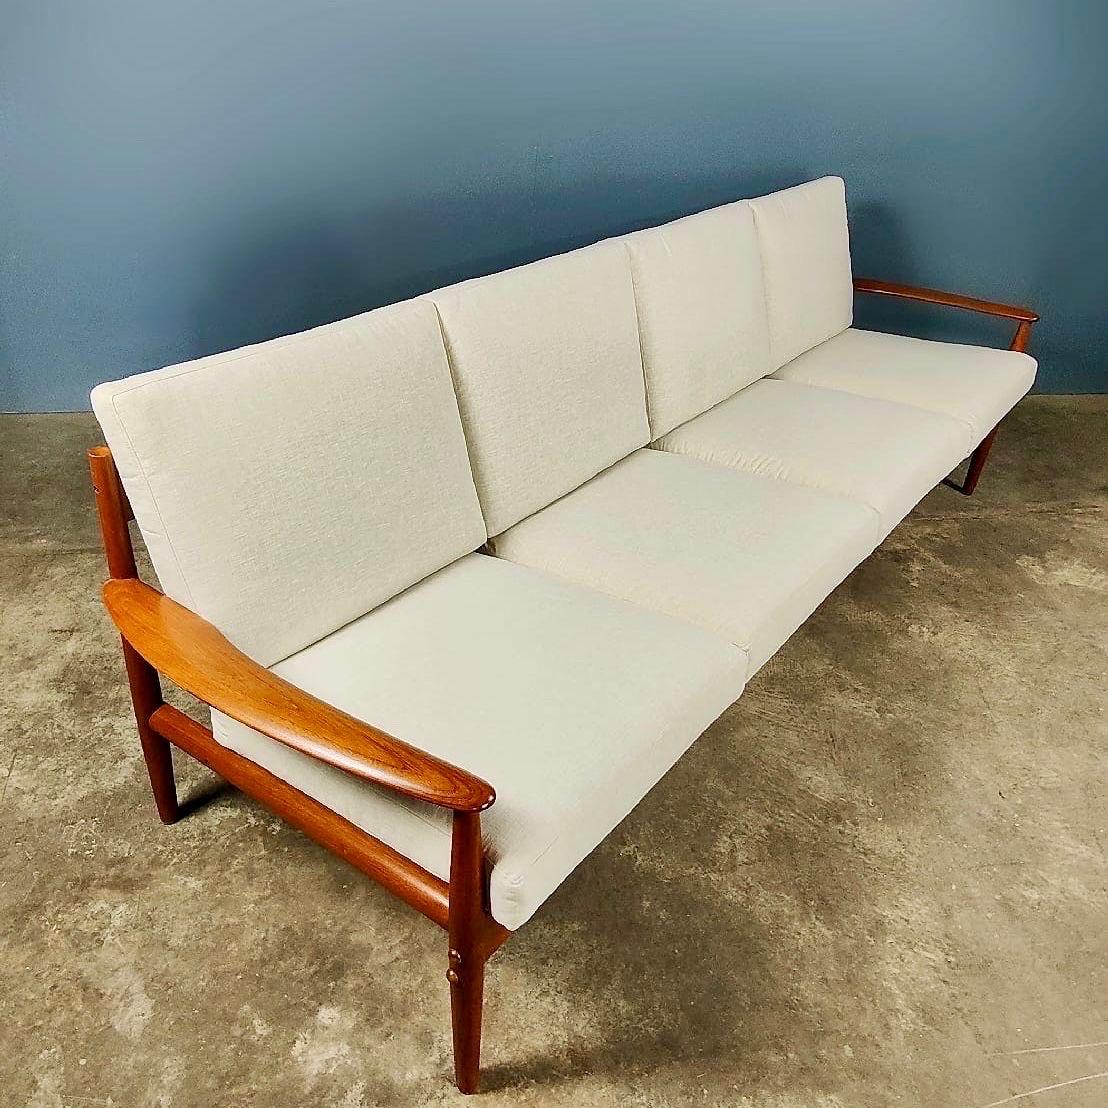 New Stock ✅

Mid Century Danish Teak 4 Seater Sofa Mode 118 by Grete Jalk for France & Son or France & Daverkosen

Made in Denmark, in the late 1950s to early 1960s, this four seater sofa has a beautifully sculpted teak frame and newly